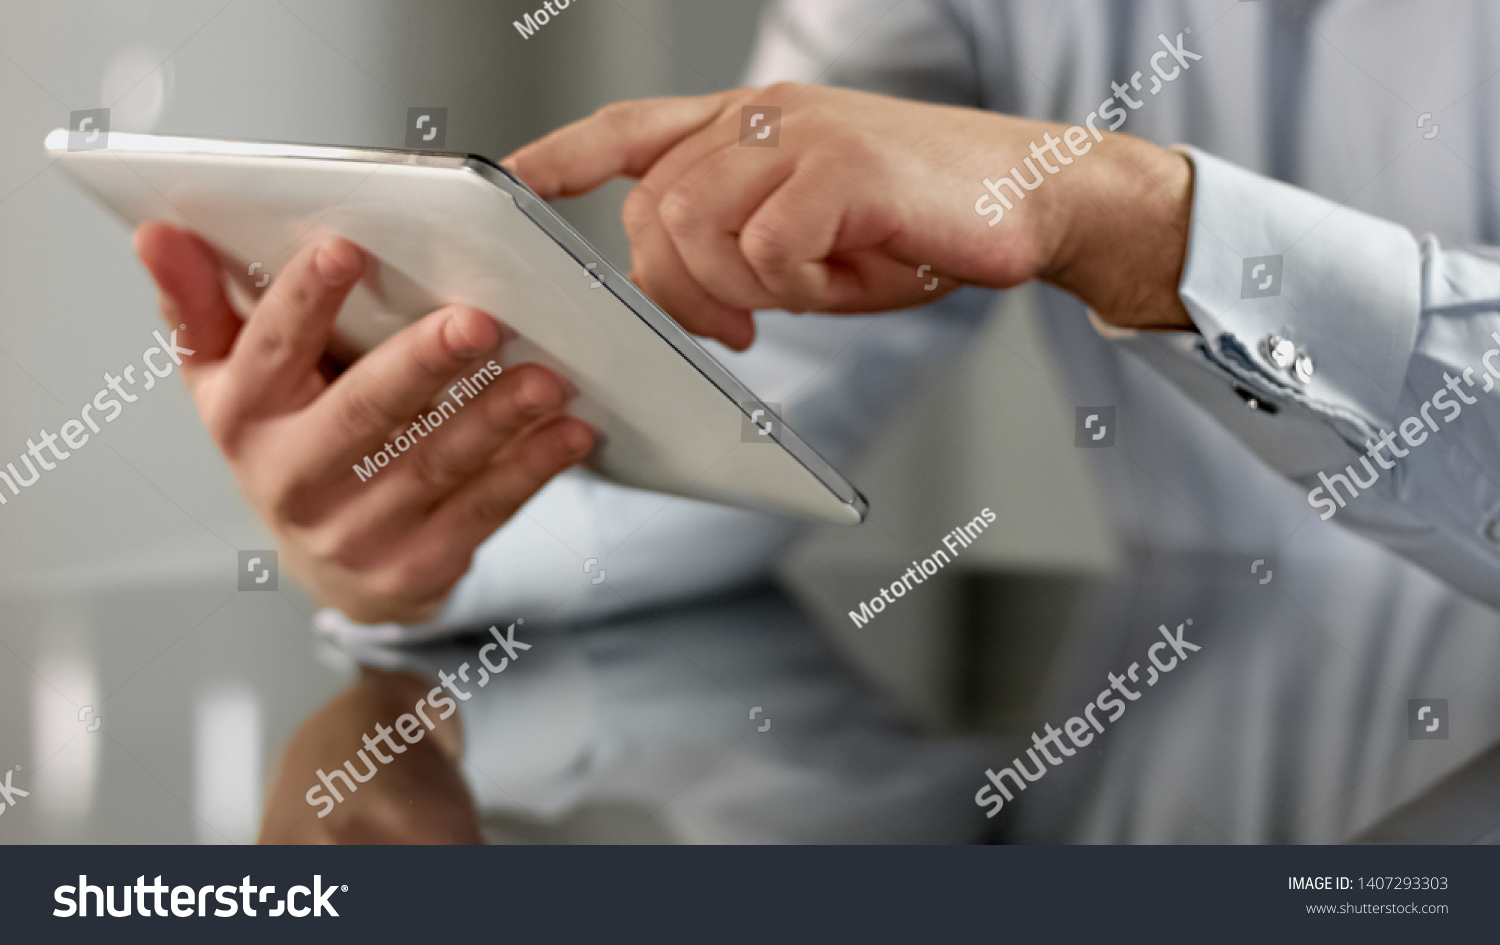 Businessman hands scrolling news application on tablet, touchscreen device #1407293303